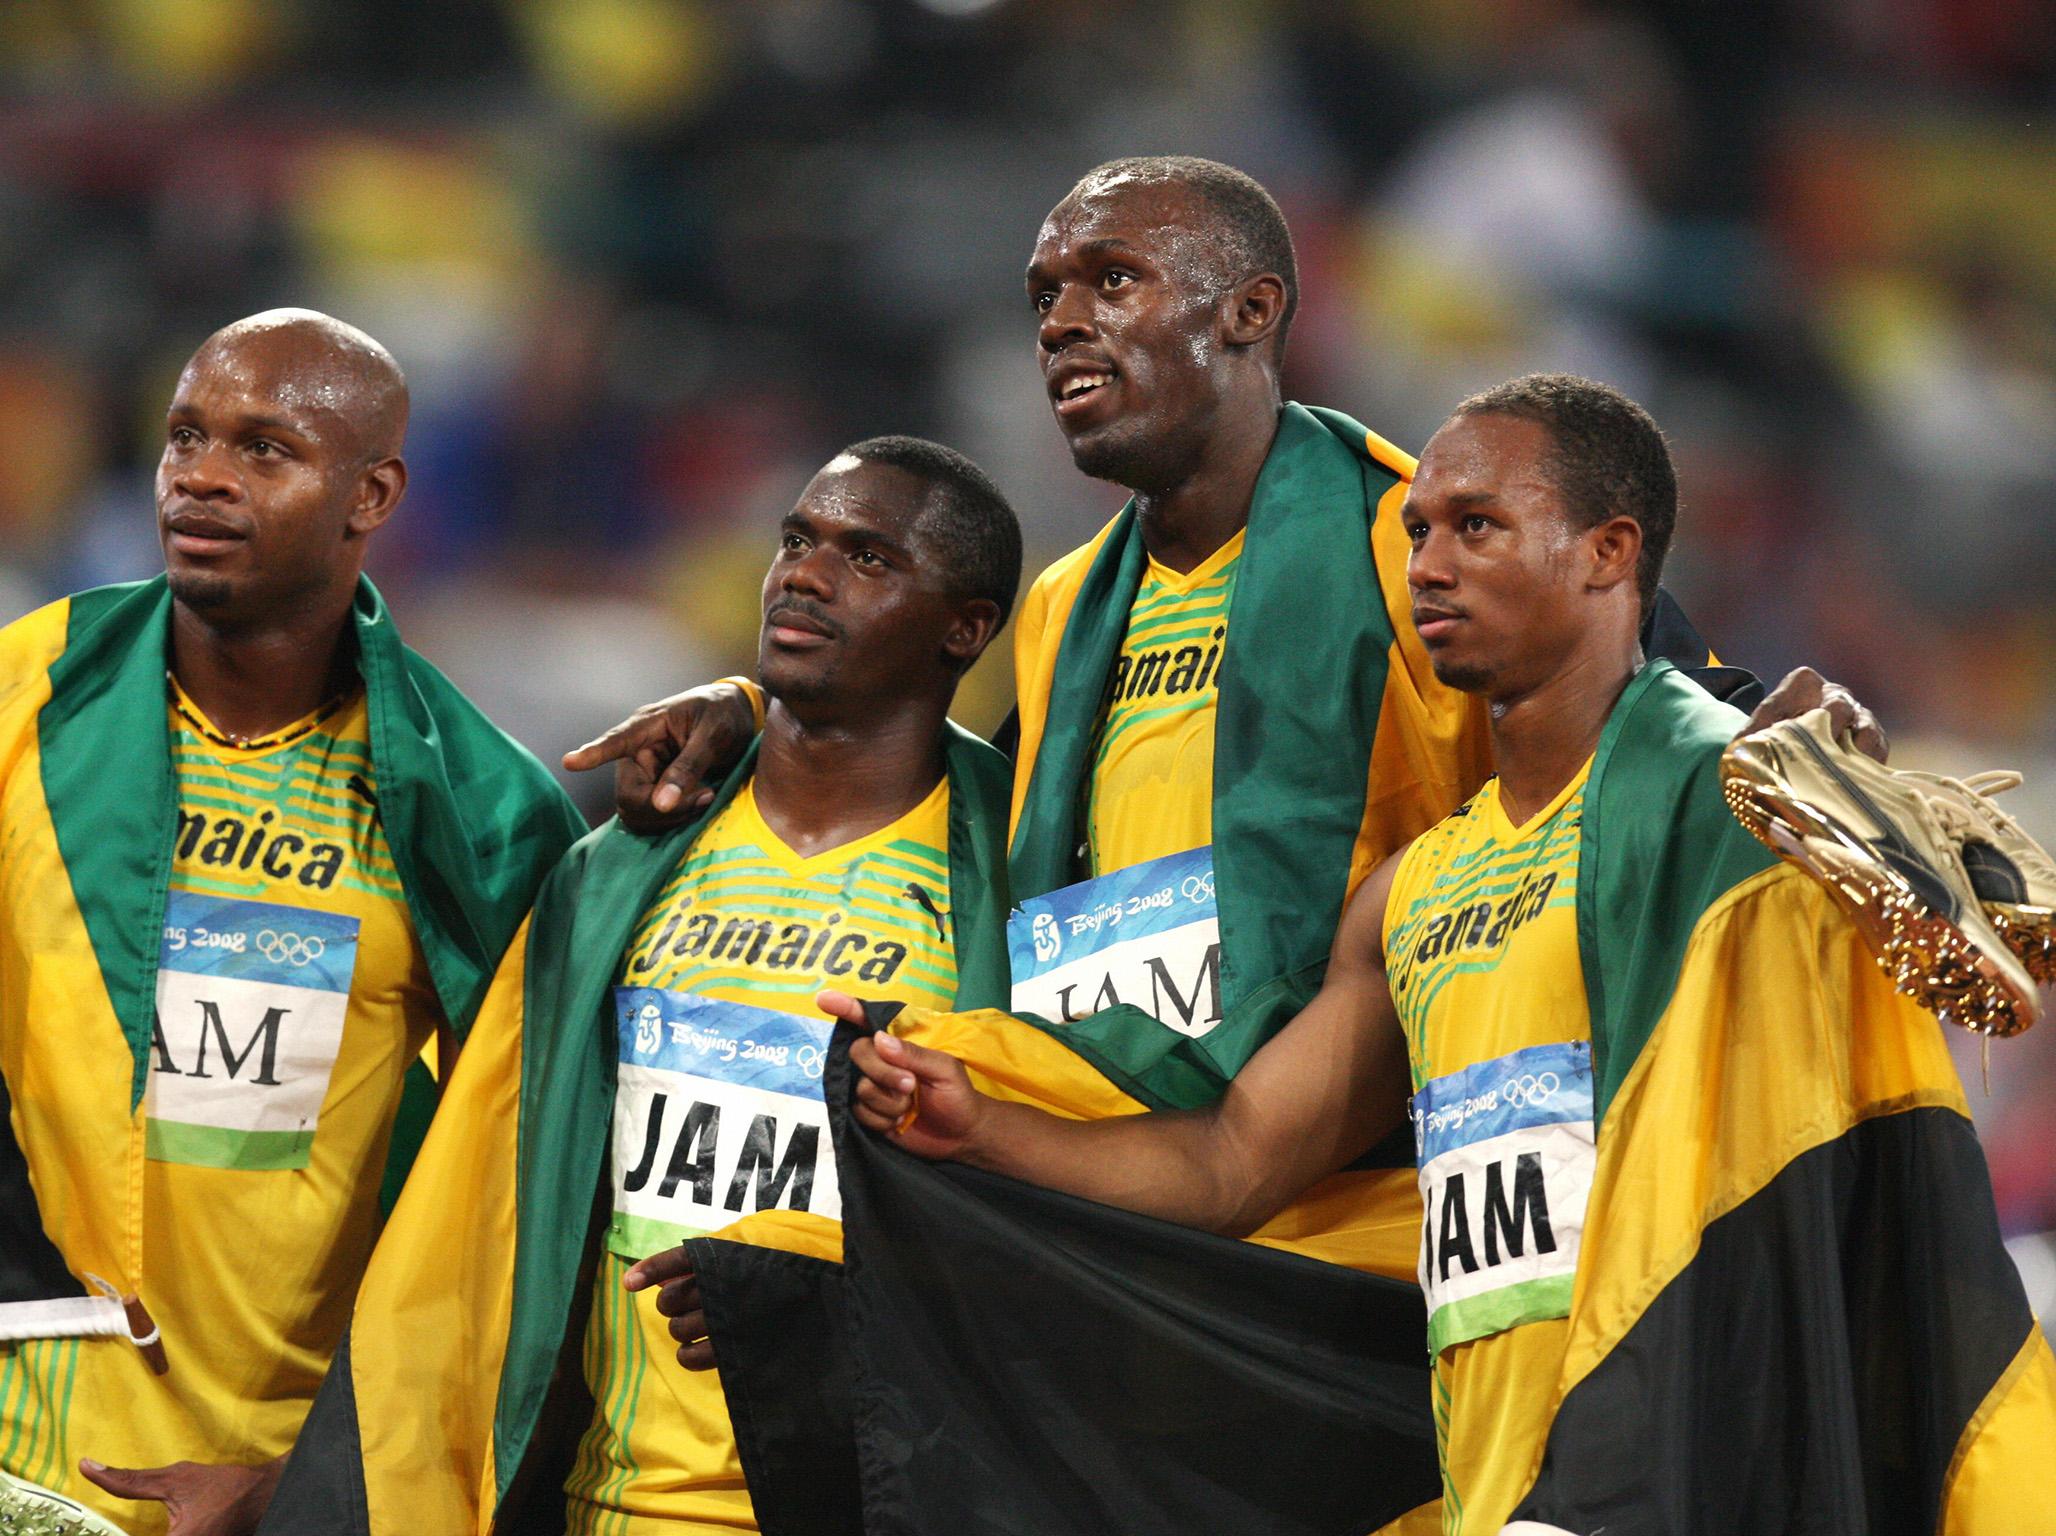 Nesta Carter, second left, was disqualified after re-examination